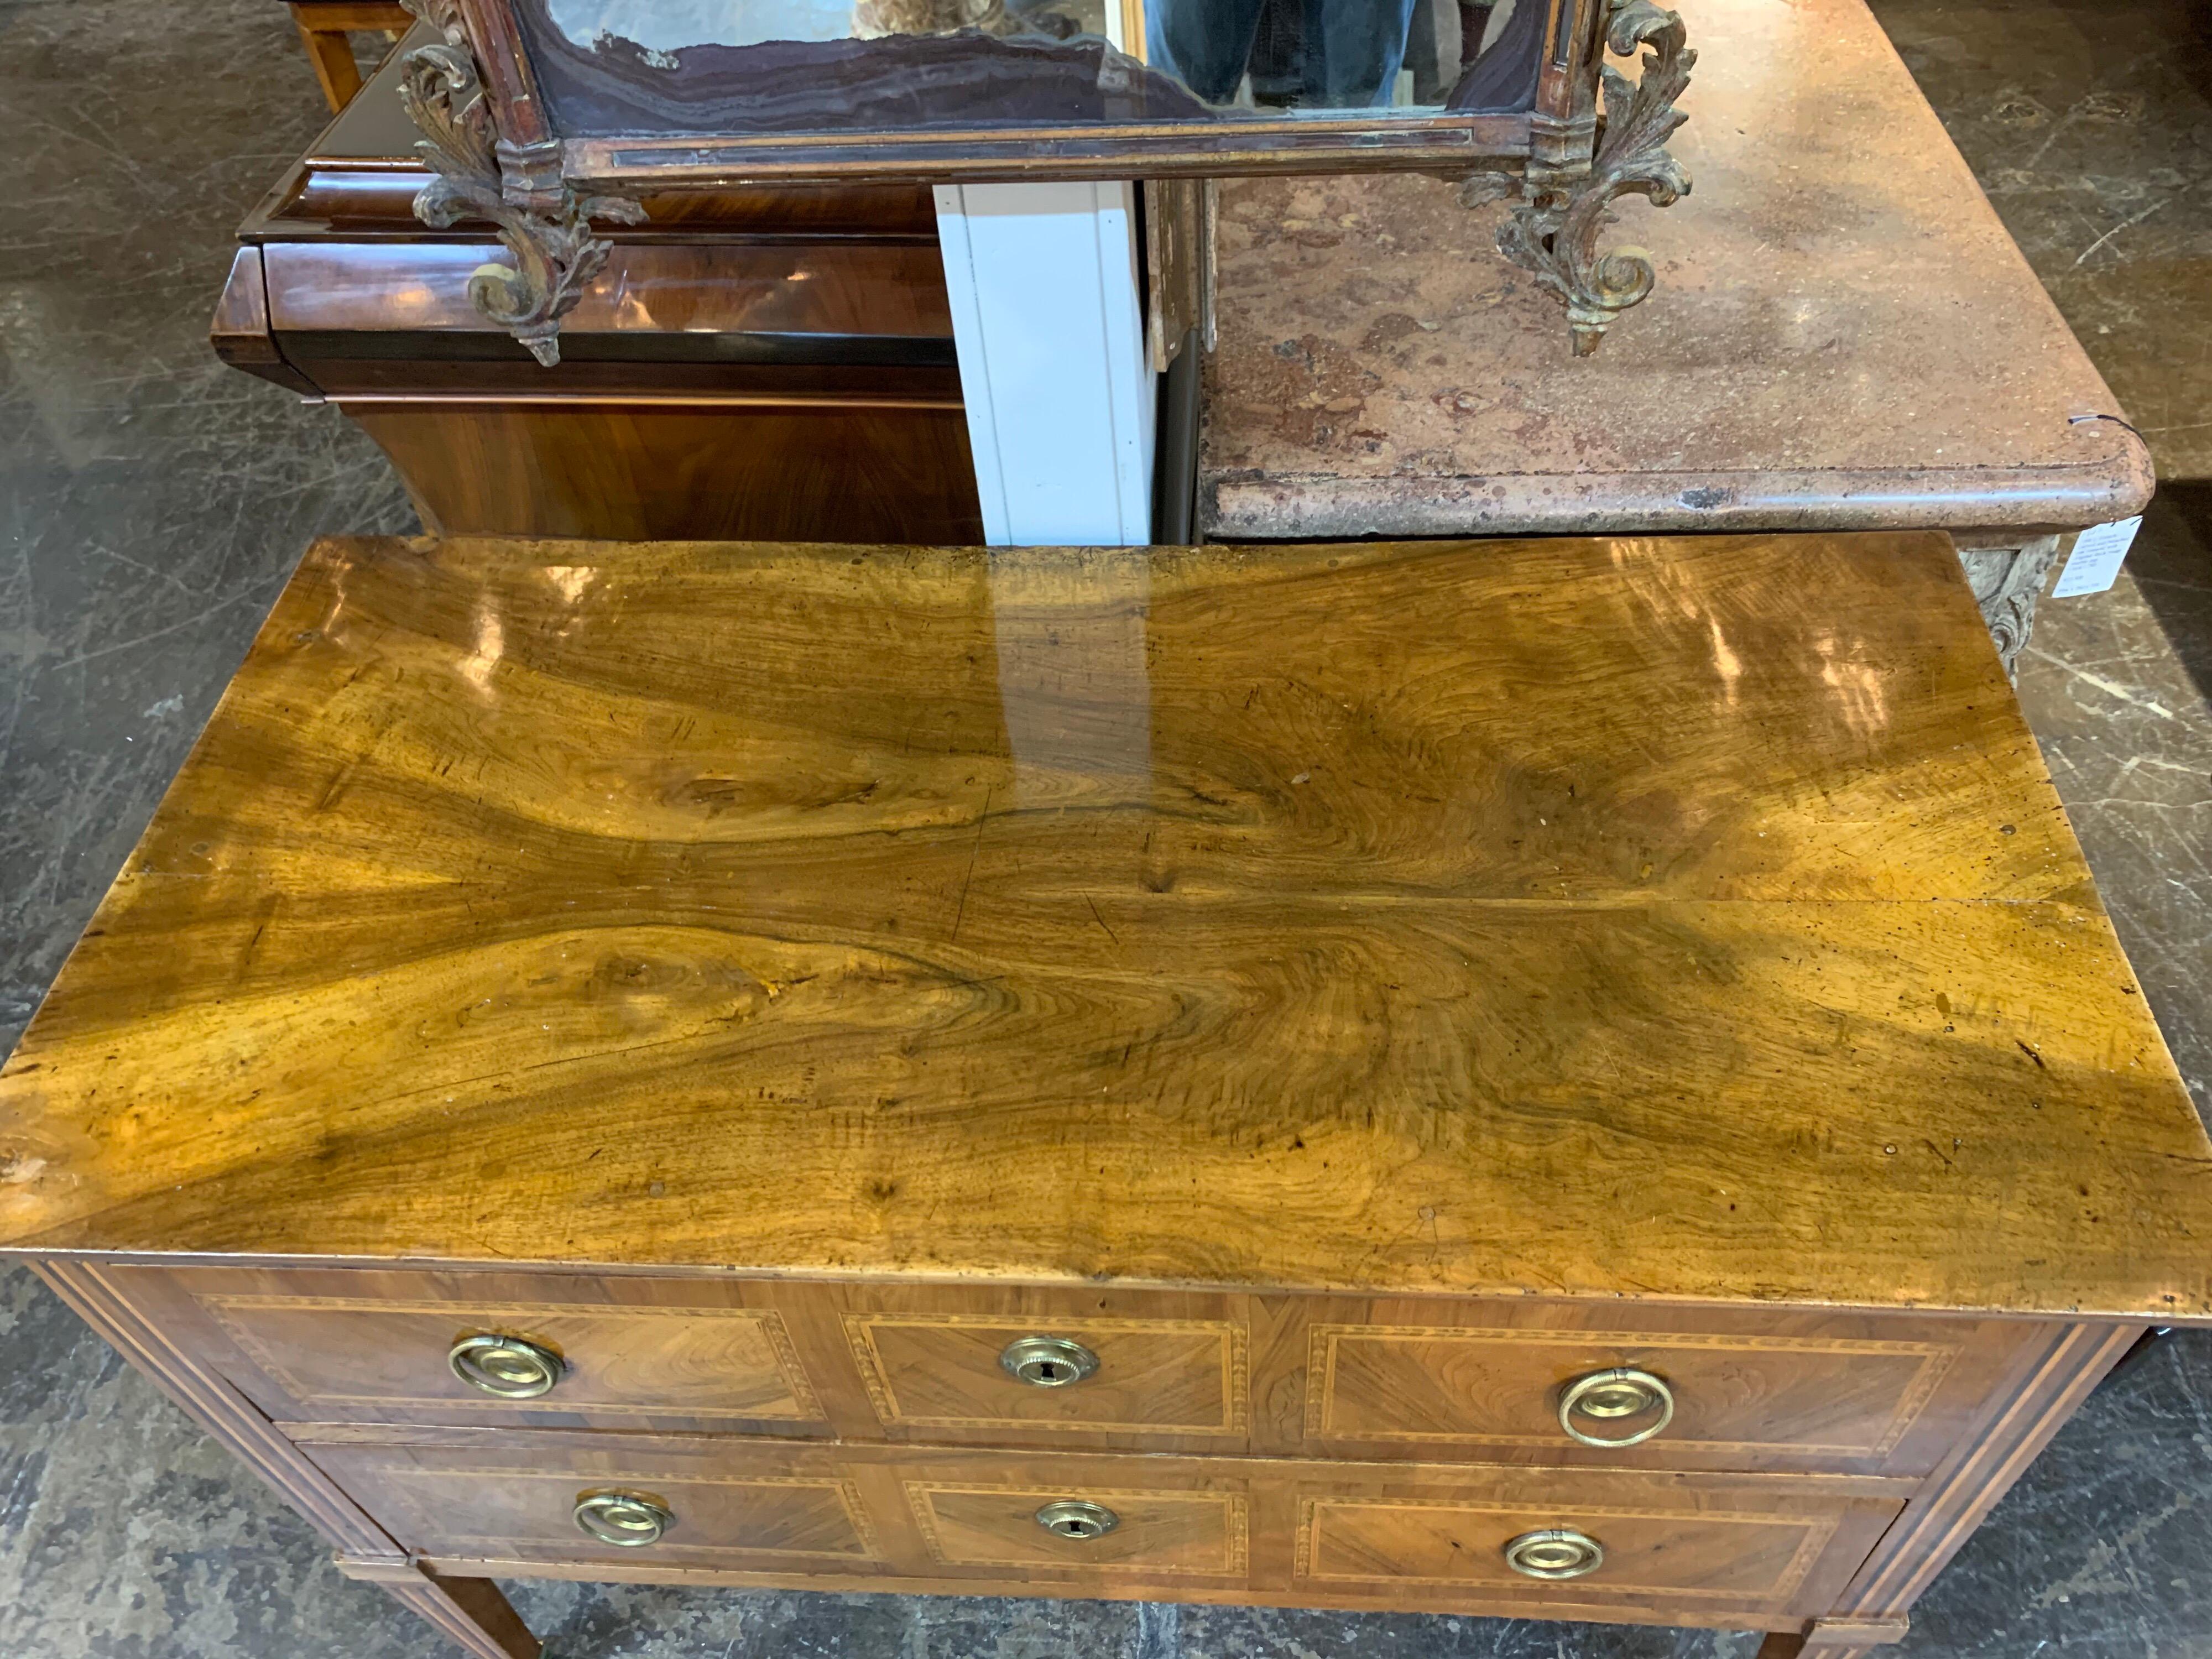 Fabulous 18th century French transitional chest with 2 drawers. The piece has nice inlaid details as well as a lovely finish on the top of the piece. A Classic beauty that would be a great addition to a fine home!